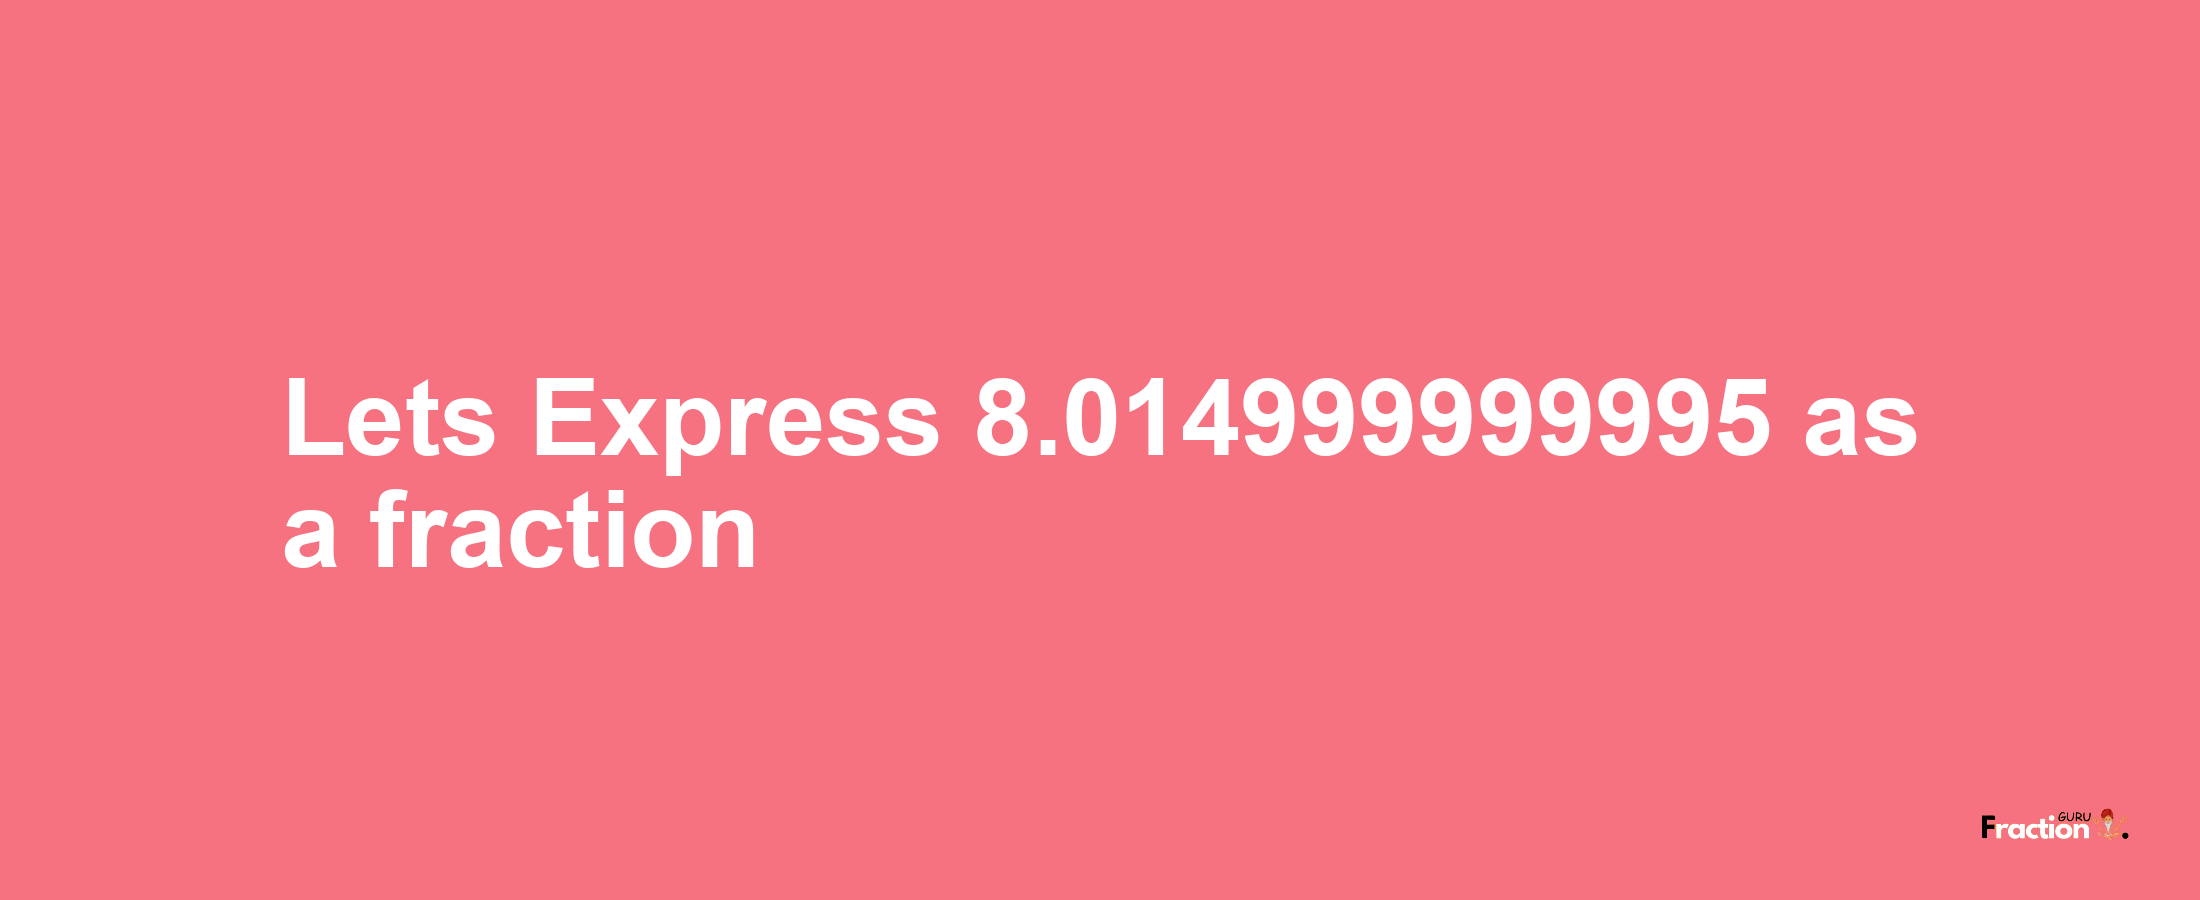 Lets Express 8.014999999995 as afraction